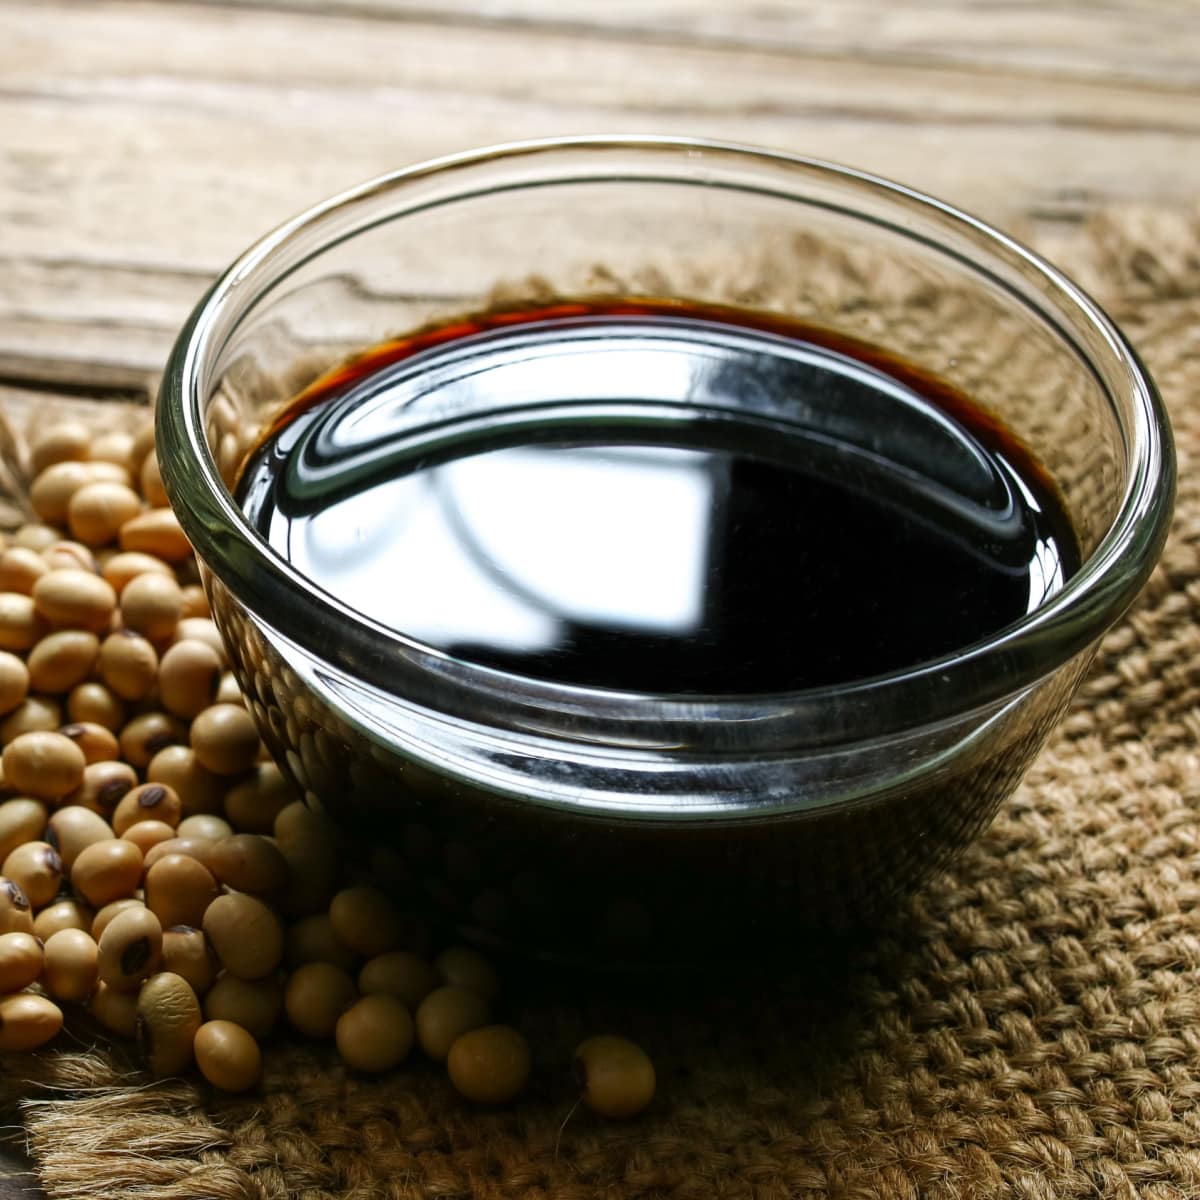 A Bowl of Soy Sauce and Raw Soy Beans on a Rustic Cloth